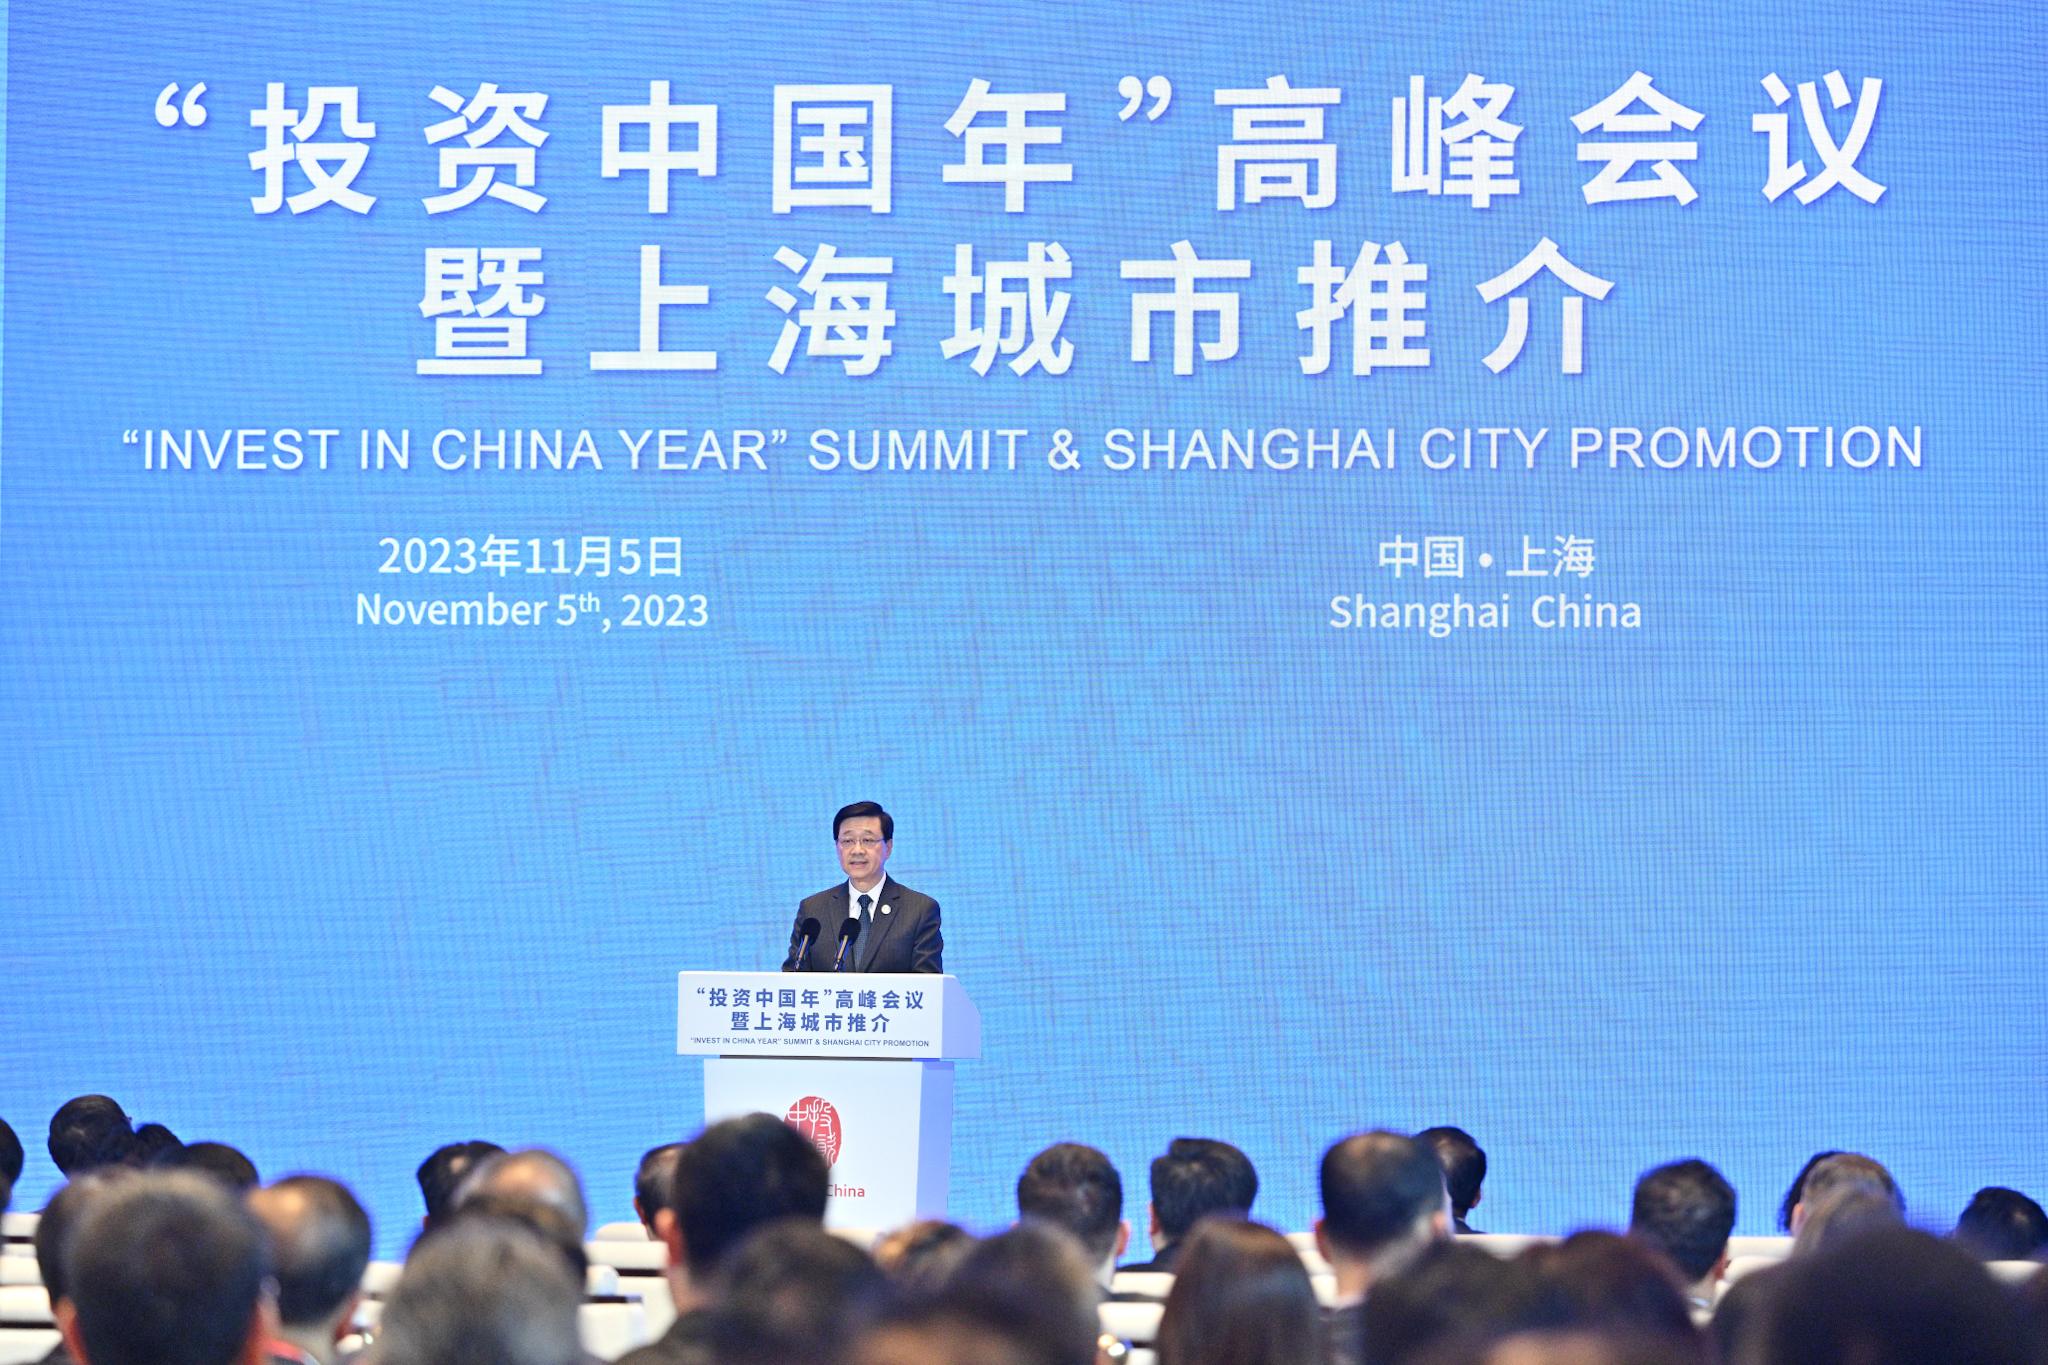 The Chief Executive, Mr John Lee, attended the "Invest in China Year" Summit & Shanghai City Promotion in Shanghai today (November 5). Photo shows Mr Lee speaking at the event.